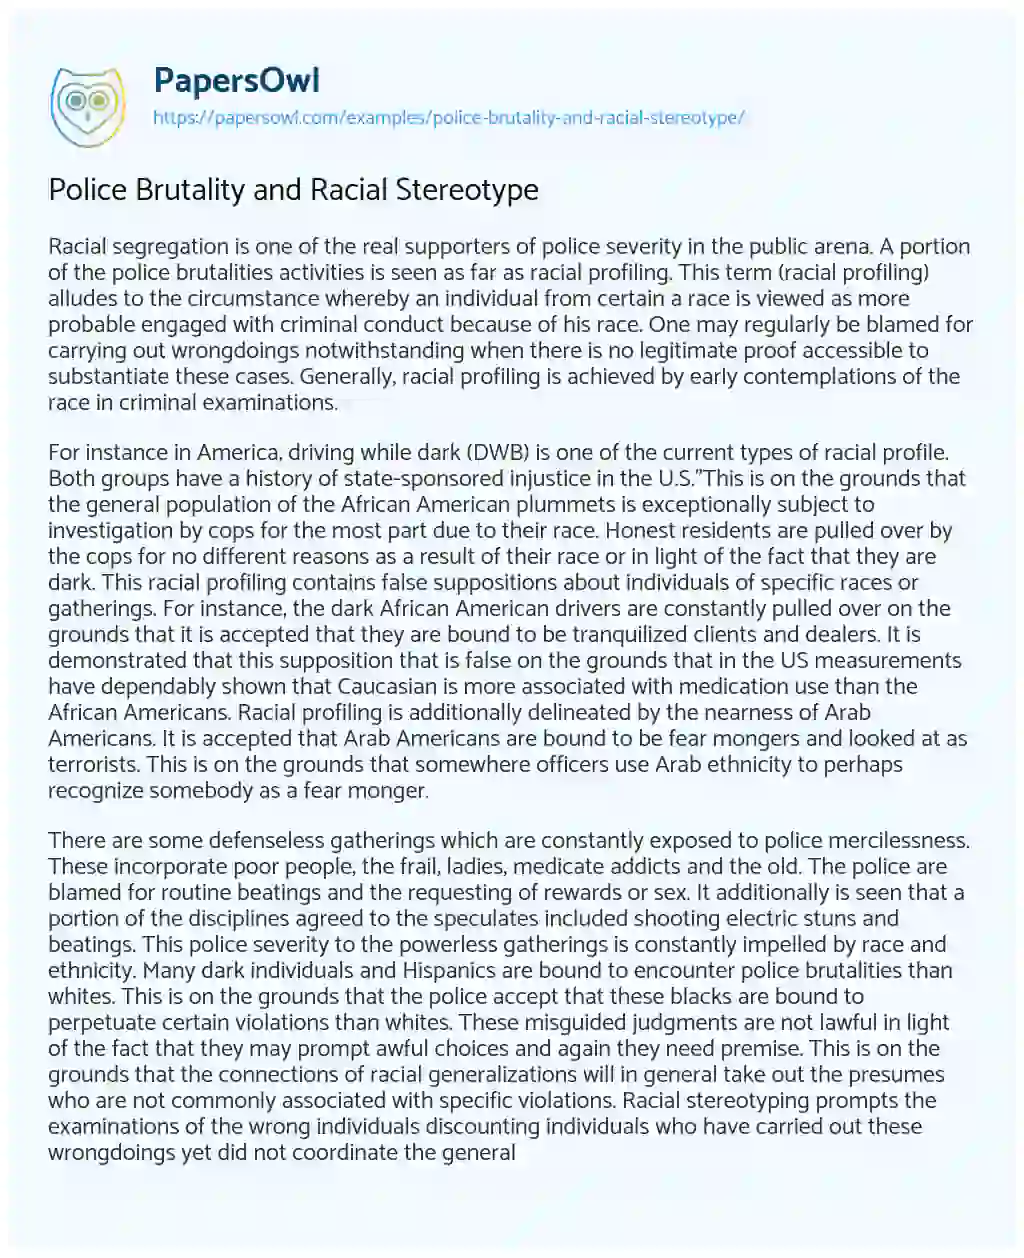 Essay on Police Brutality and Racial Stereotype